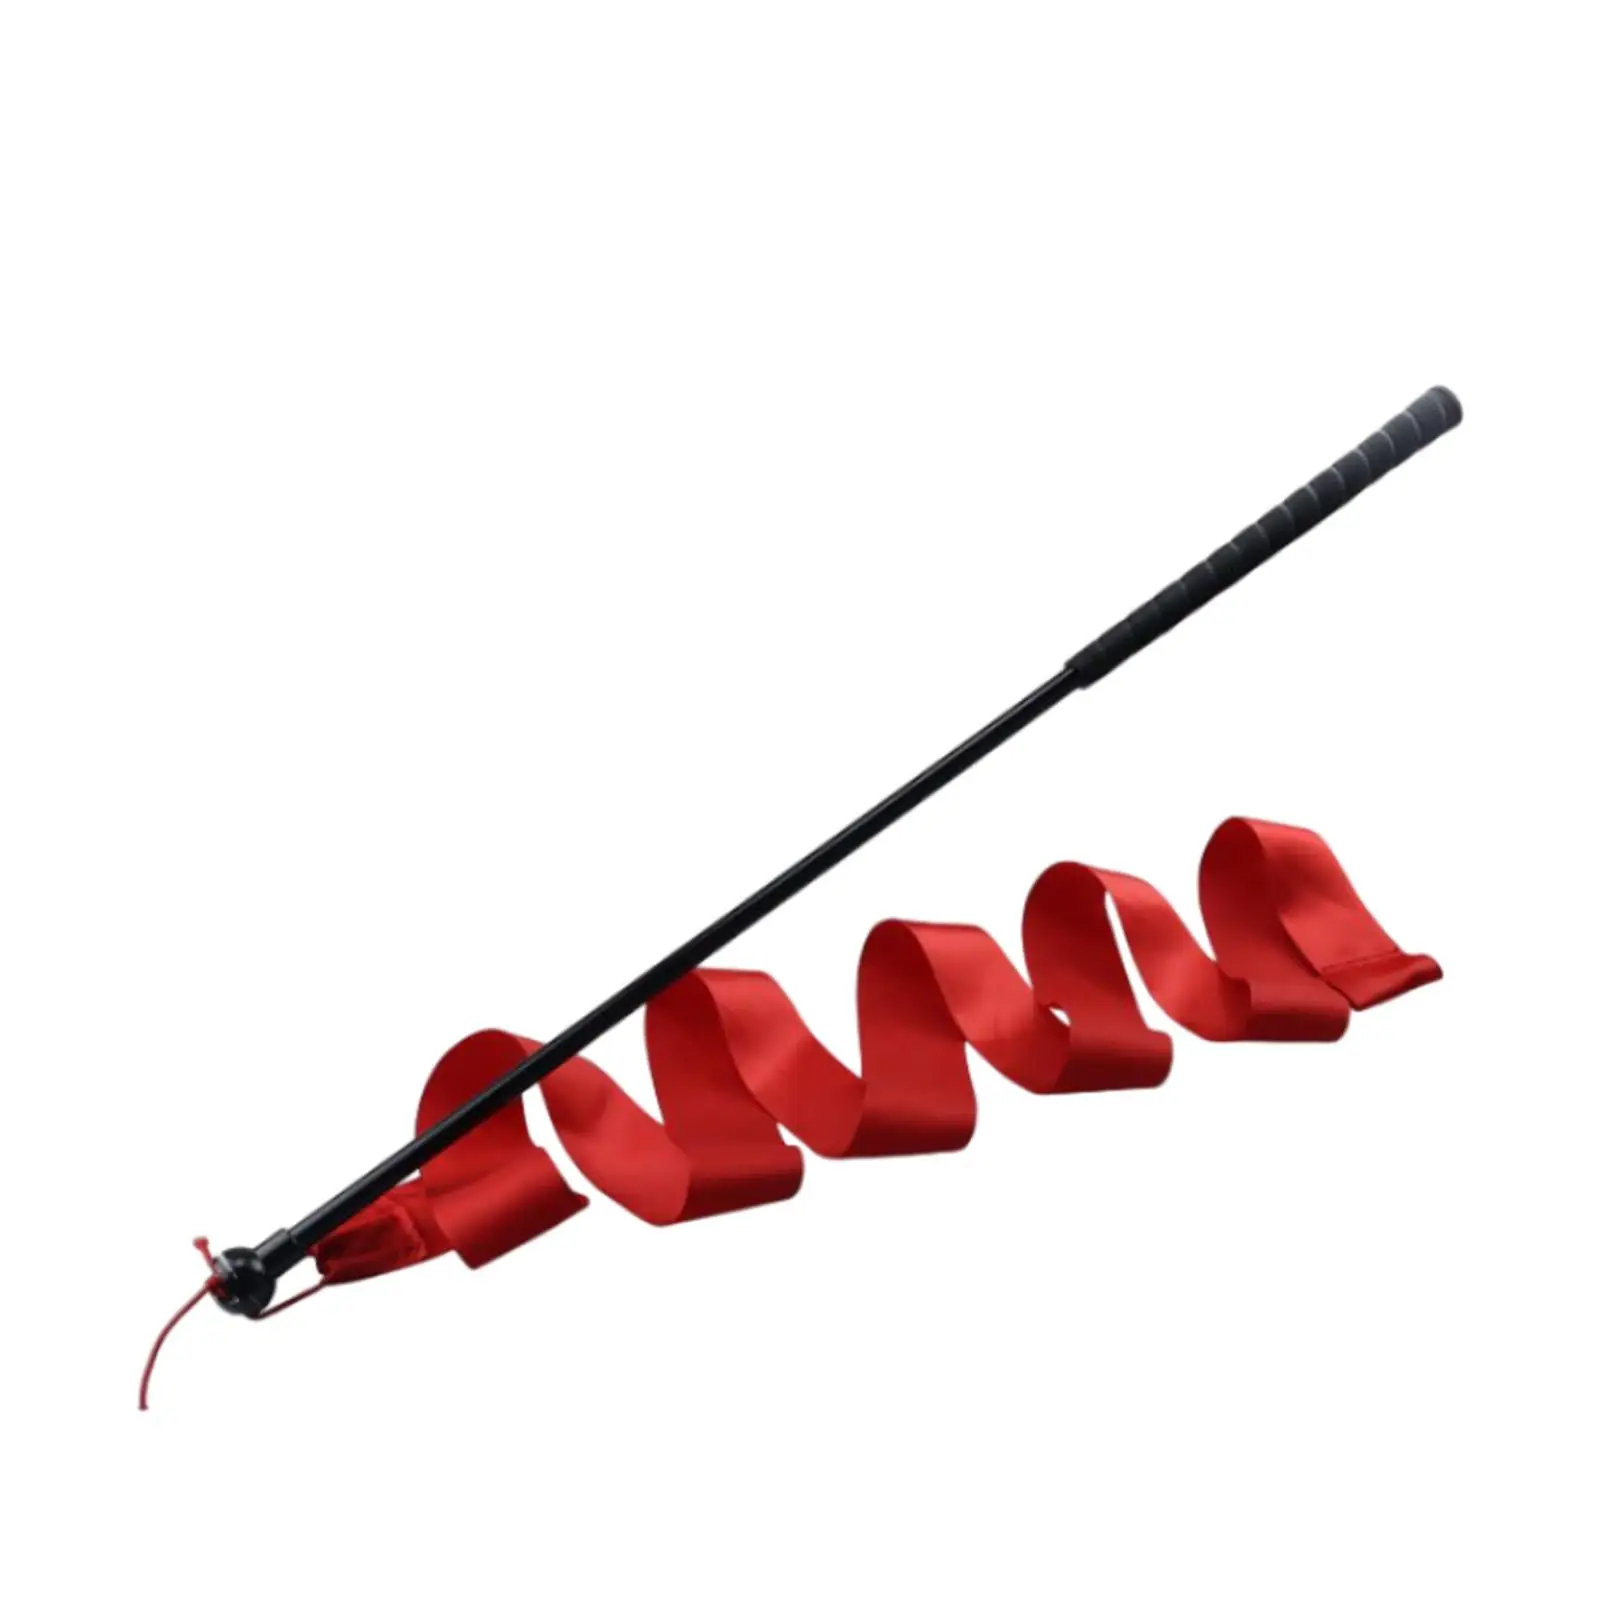 Warm up Stick Durable Comfortable Golf Swing Trainer for Beginner Indoor, Outdoor Teaching Supplies Improved Tempo Strength